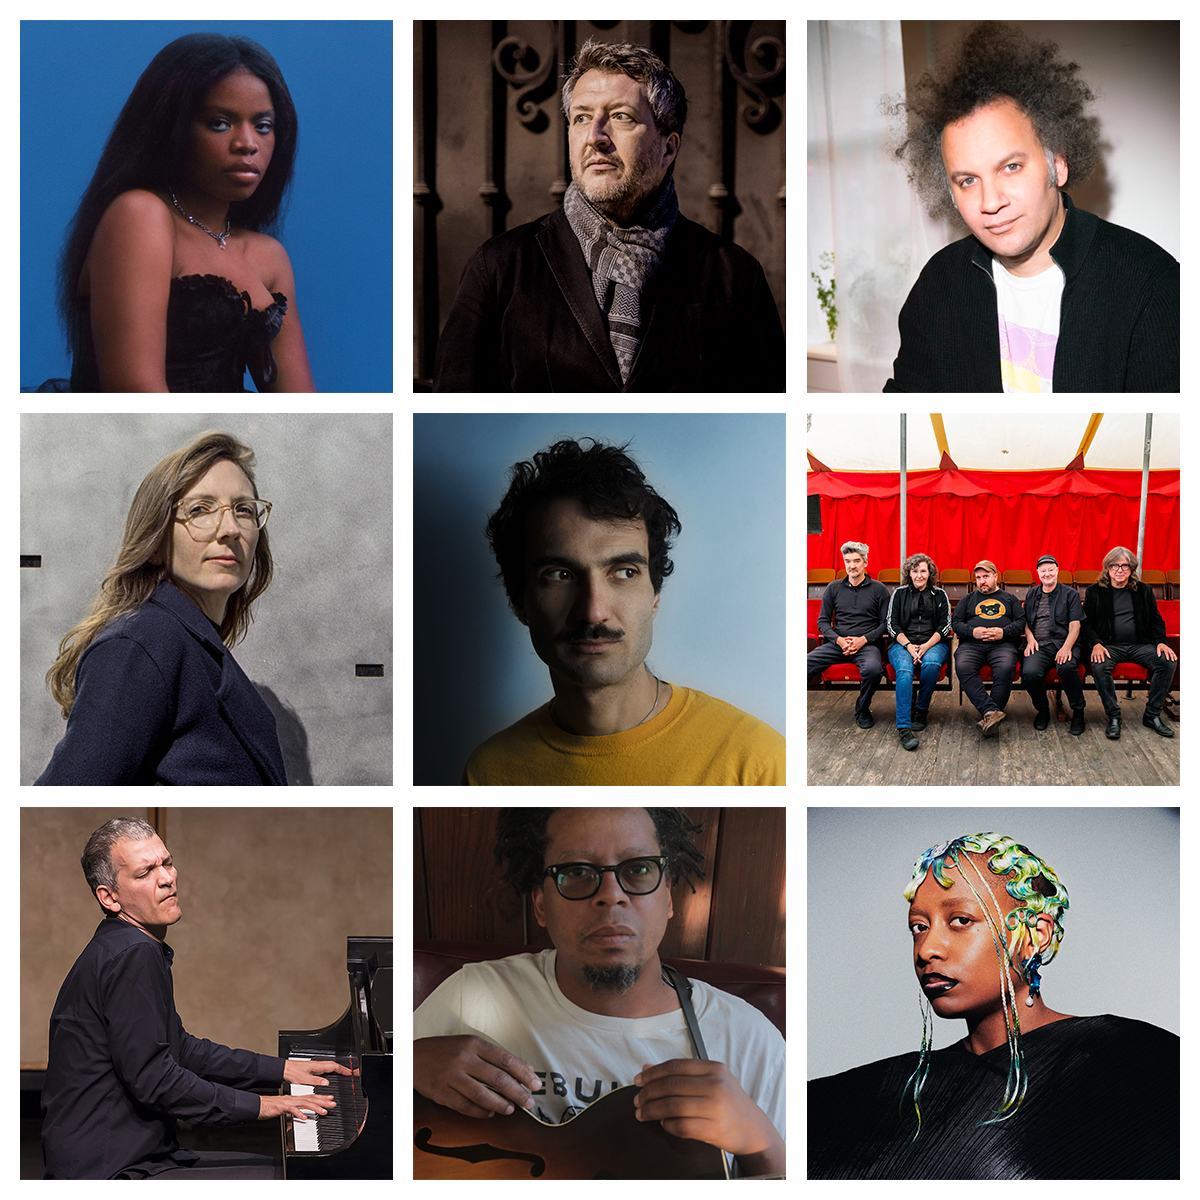 Happy St. Patrick’s Day weekend! There’s lots of great live music ahead around the world from @vagabonvagabon, @Thomas_ades, @Tyondai, Mary Halvorson, @tigranmusic, @themagfields, @bradmehldau, @cecilesalvant, and Jeff Parker: nonesuch.com/journal/nonesu…